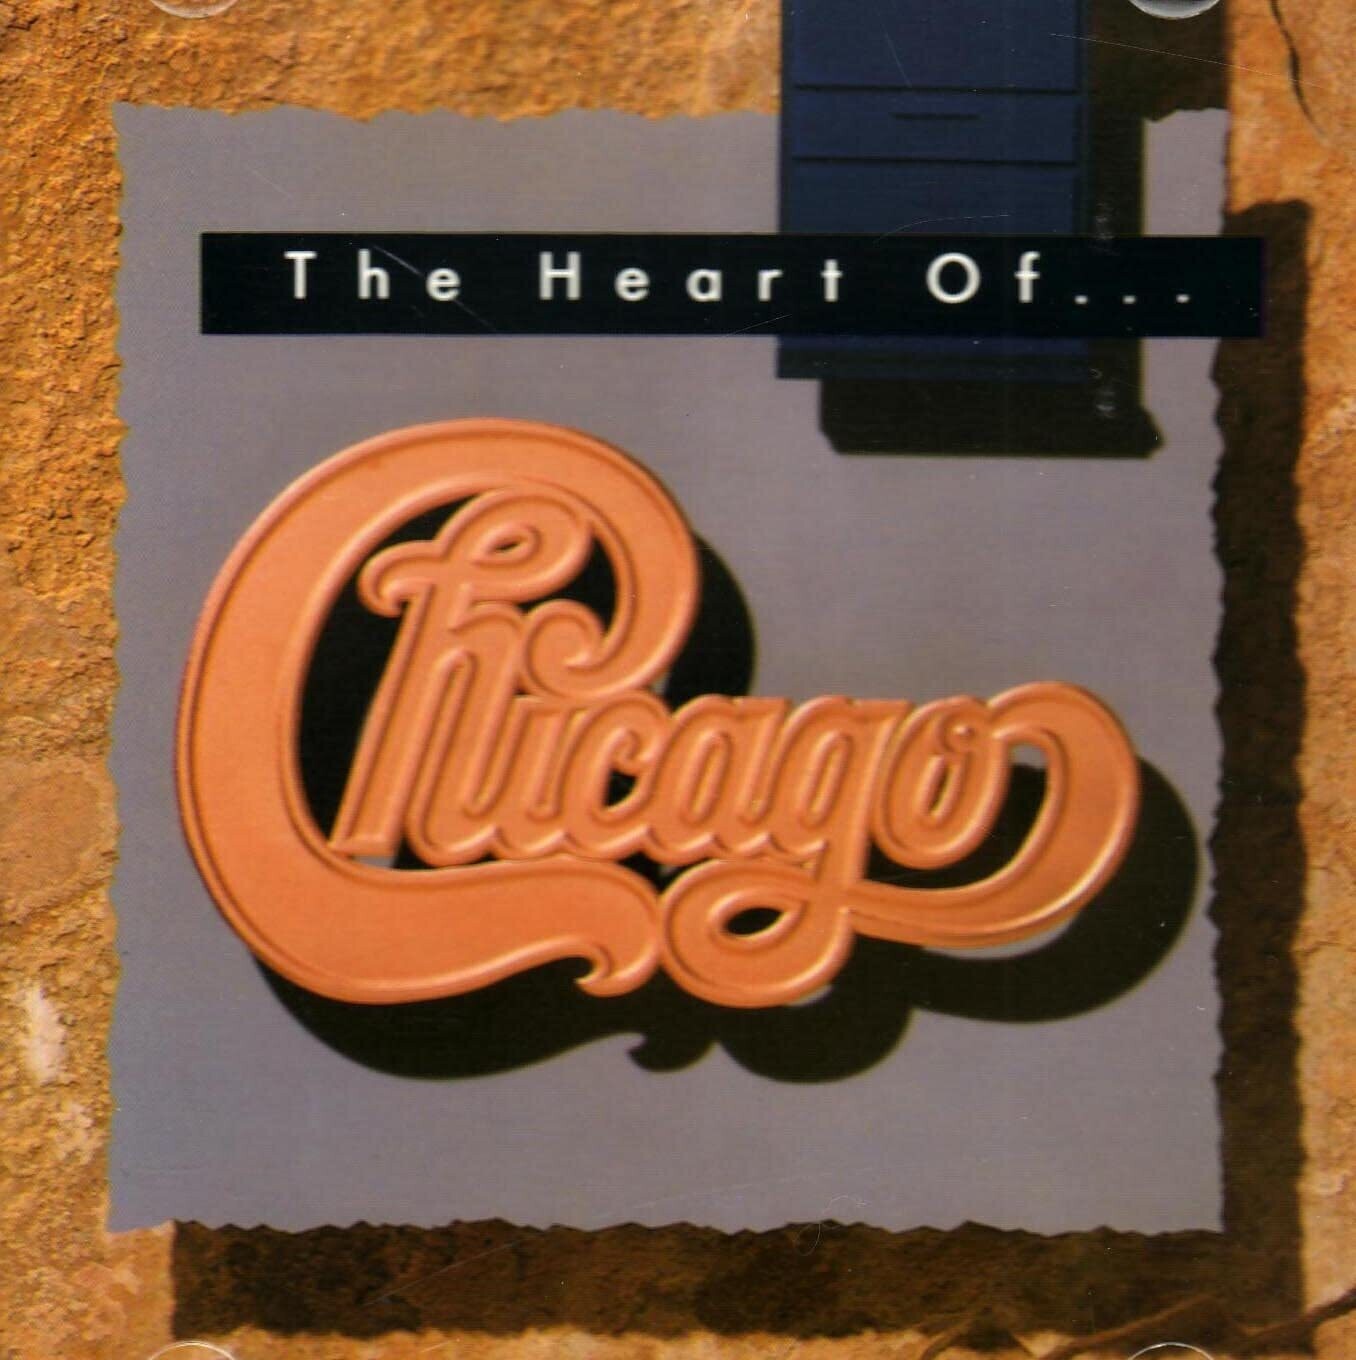 The Heart of...Chicago